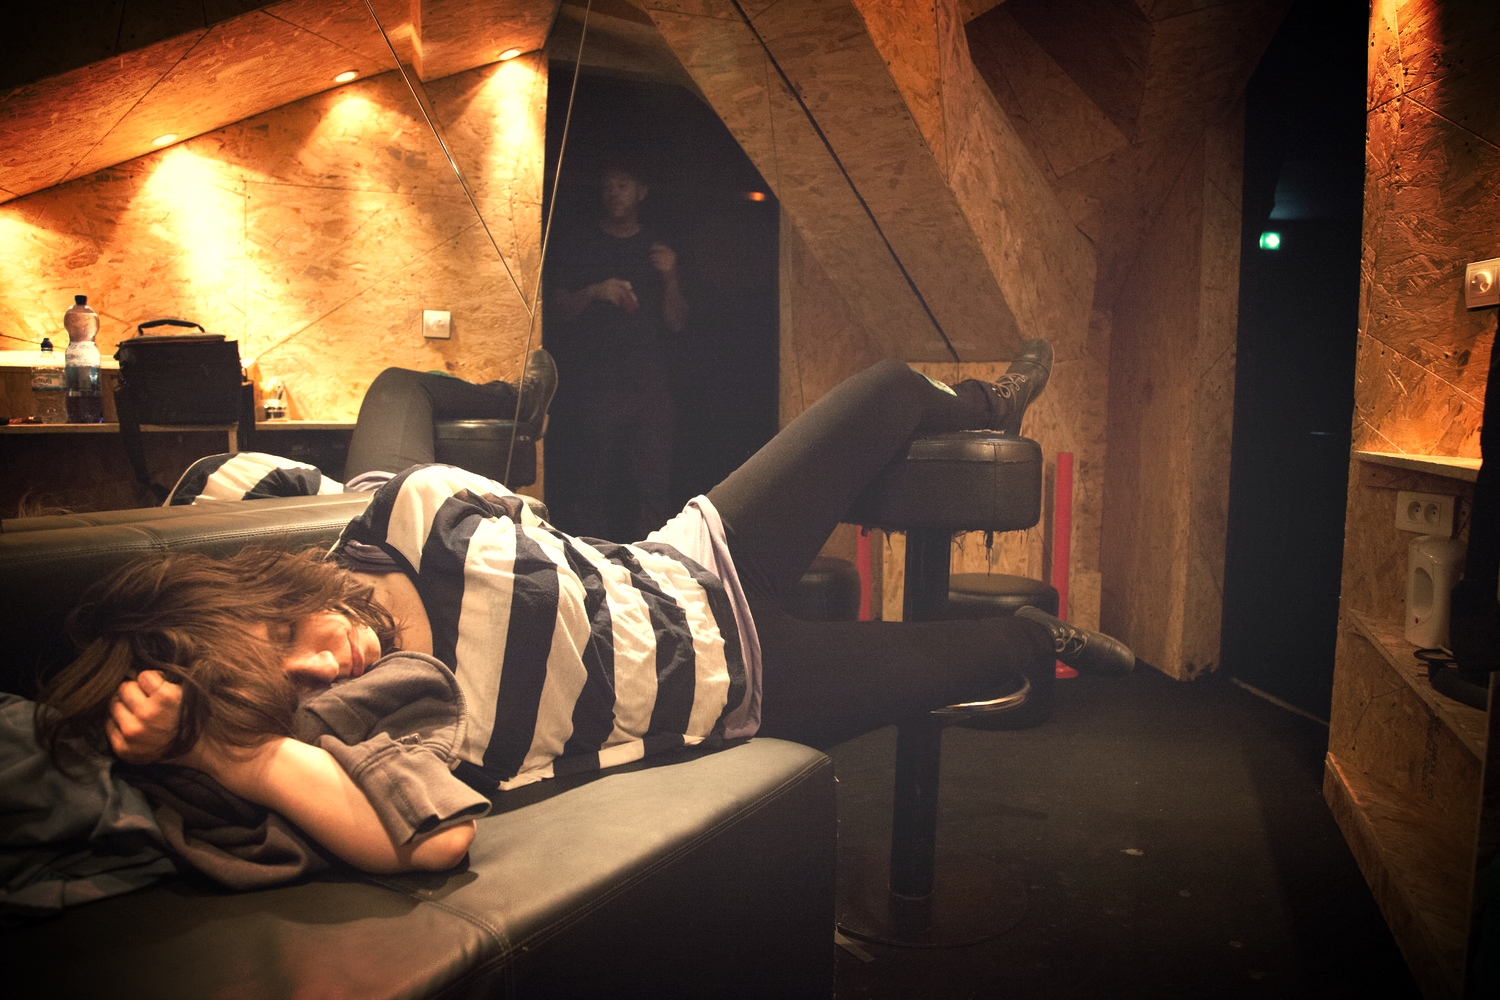  quick nap backstage at  Silencio &nbsp;before late night Paris show post-Garbage 